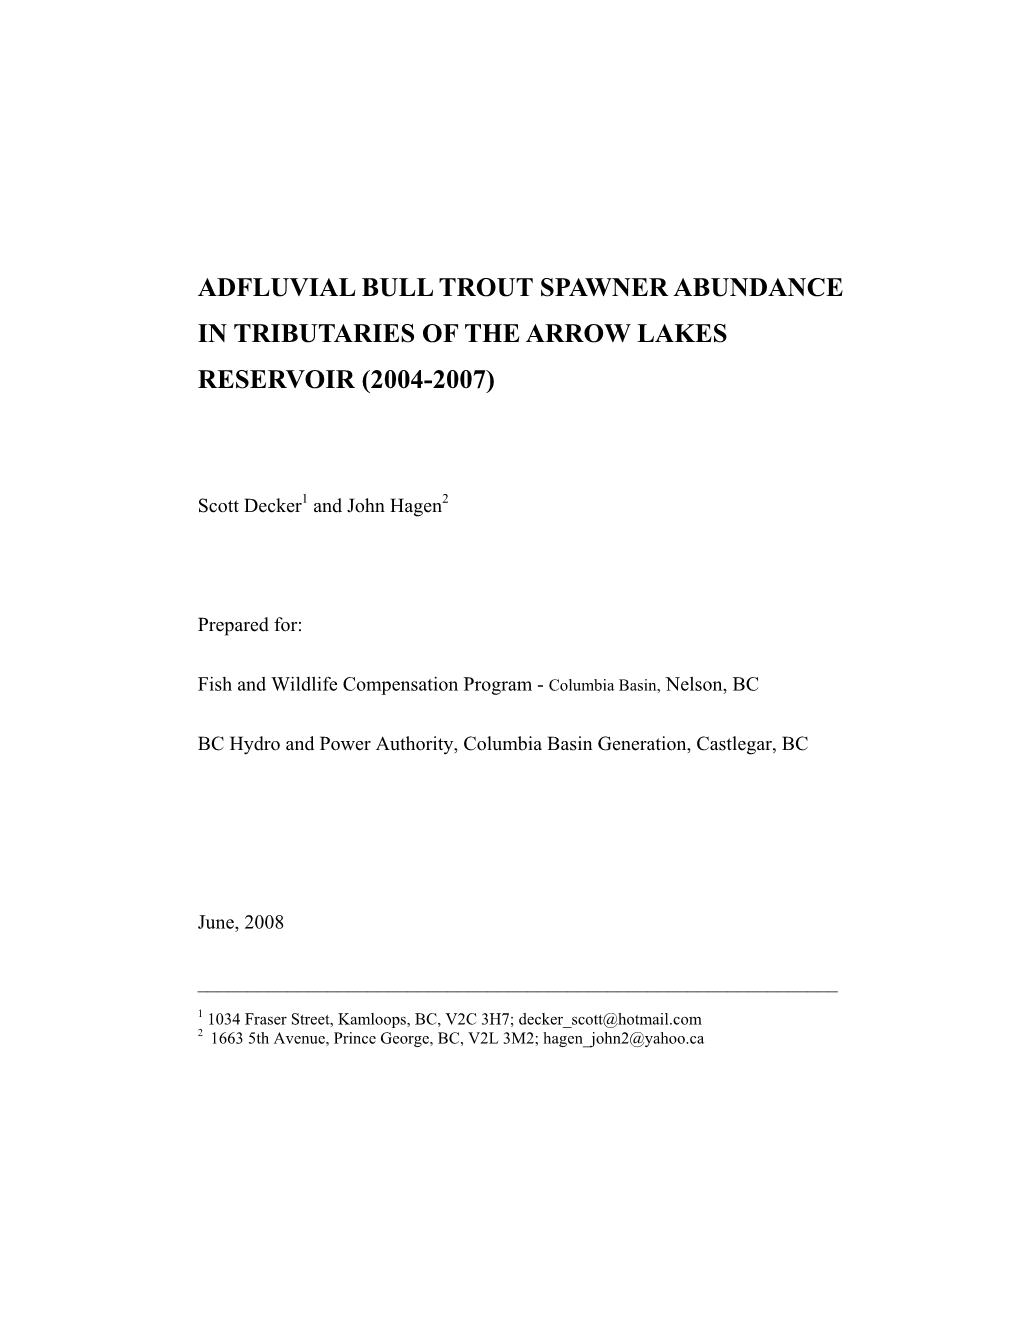 Adfluvial Bull Trout Spawner Abundance in Tributaries of the Arrow Lakes Reservoir (2004-2007)